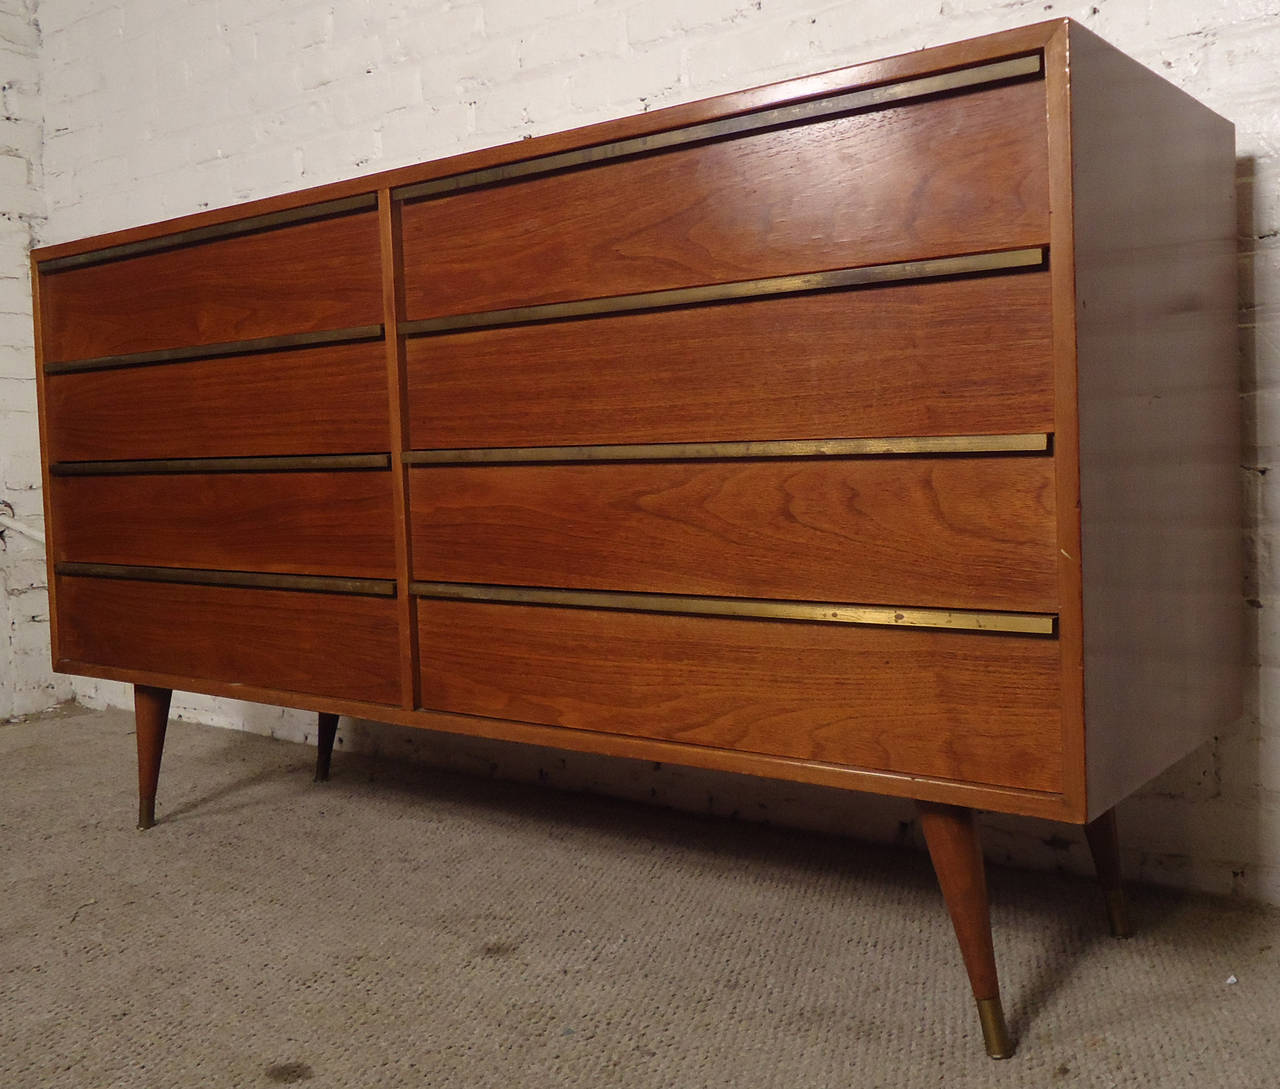 Vintage American made walnut dresser in the style of McCobb.
Eight brass trimmed drawers on beautifully tapered legs. Very elegant and well-built.
Pictures shown are before refinishing.

(Please confirm item location - NY or NJ - with dealer).